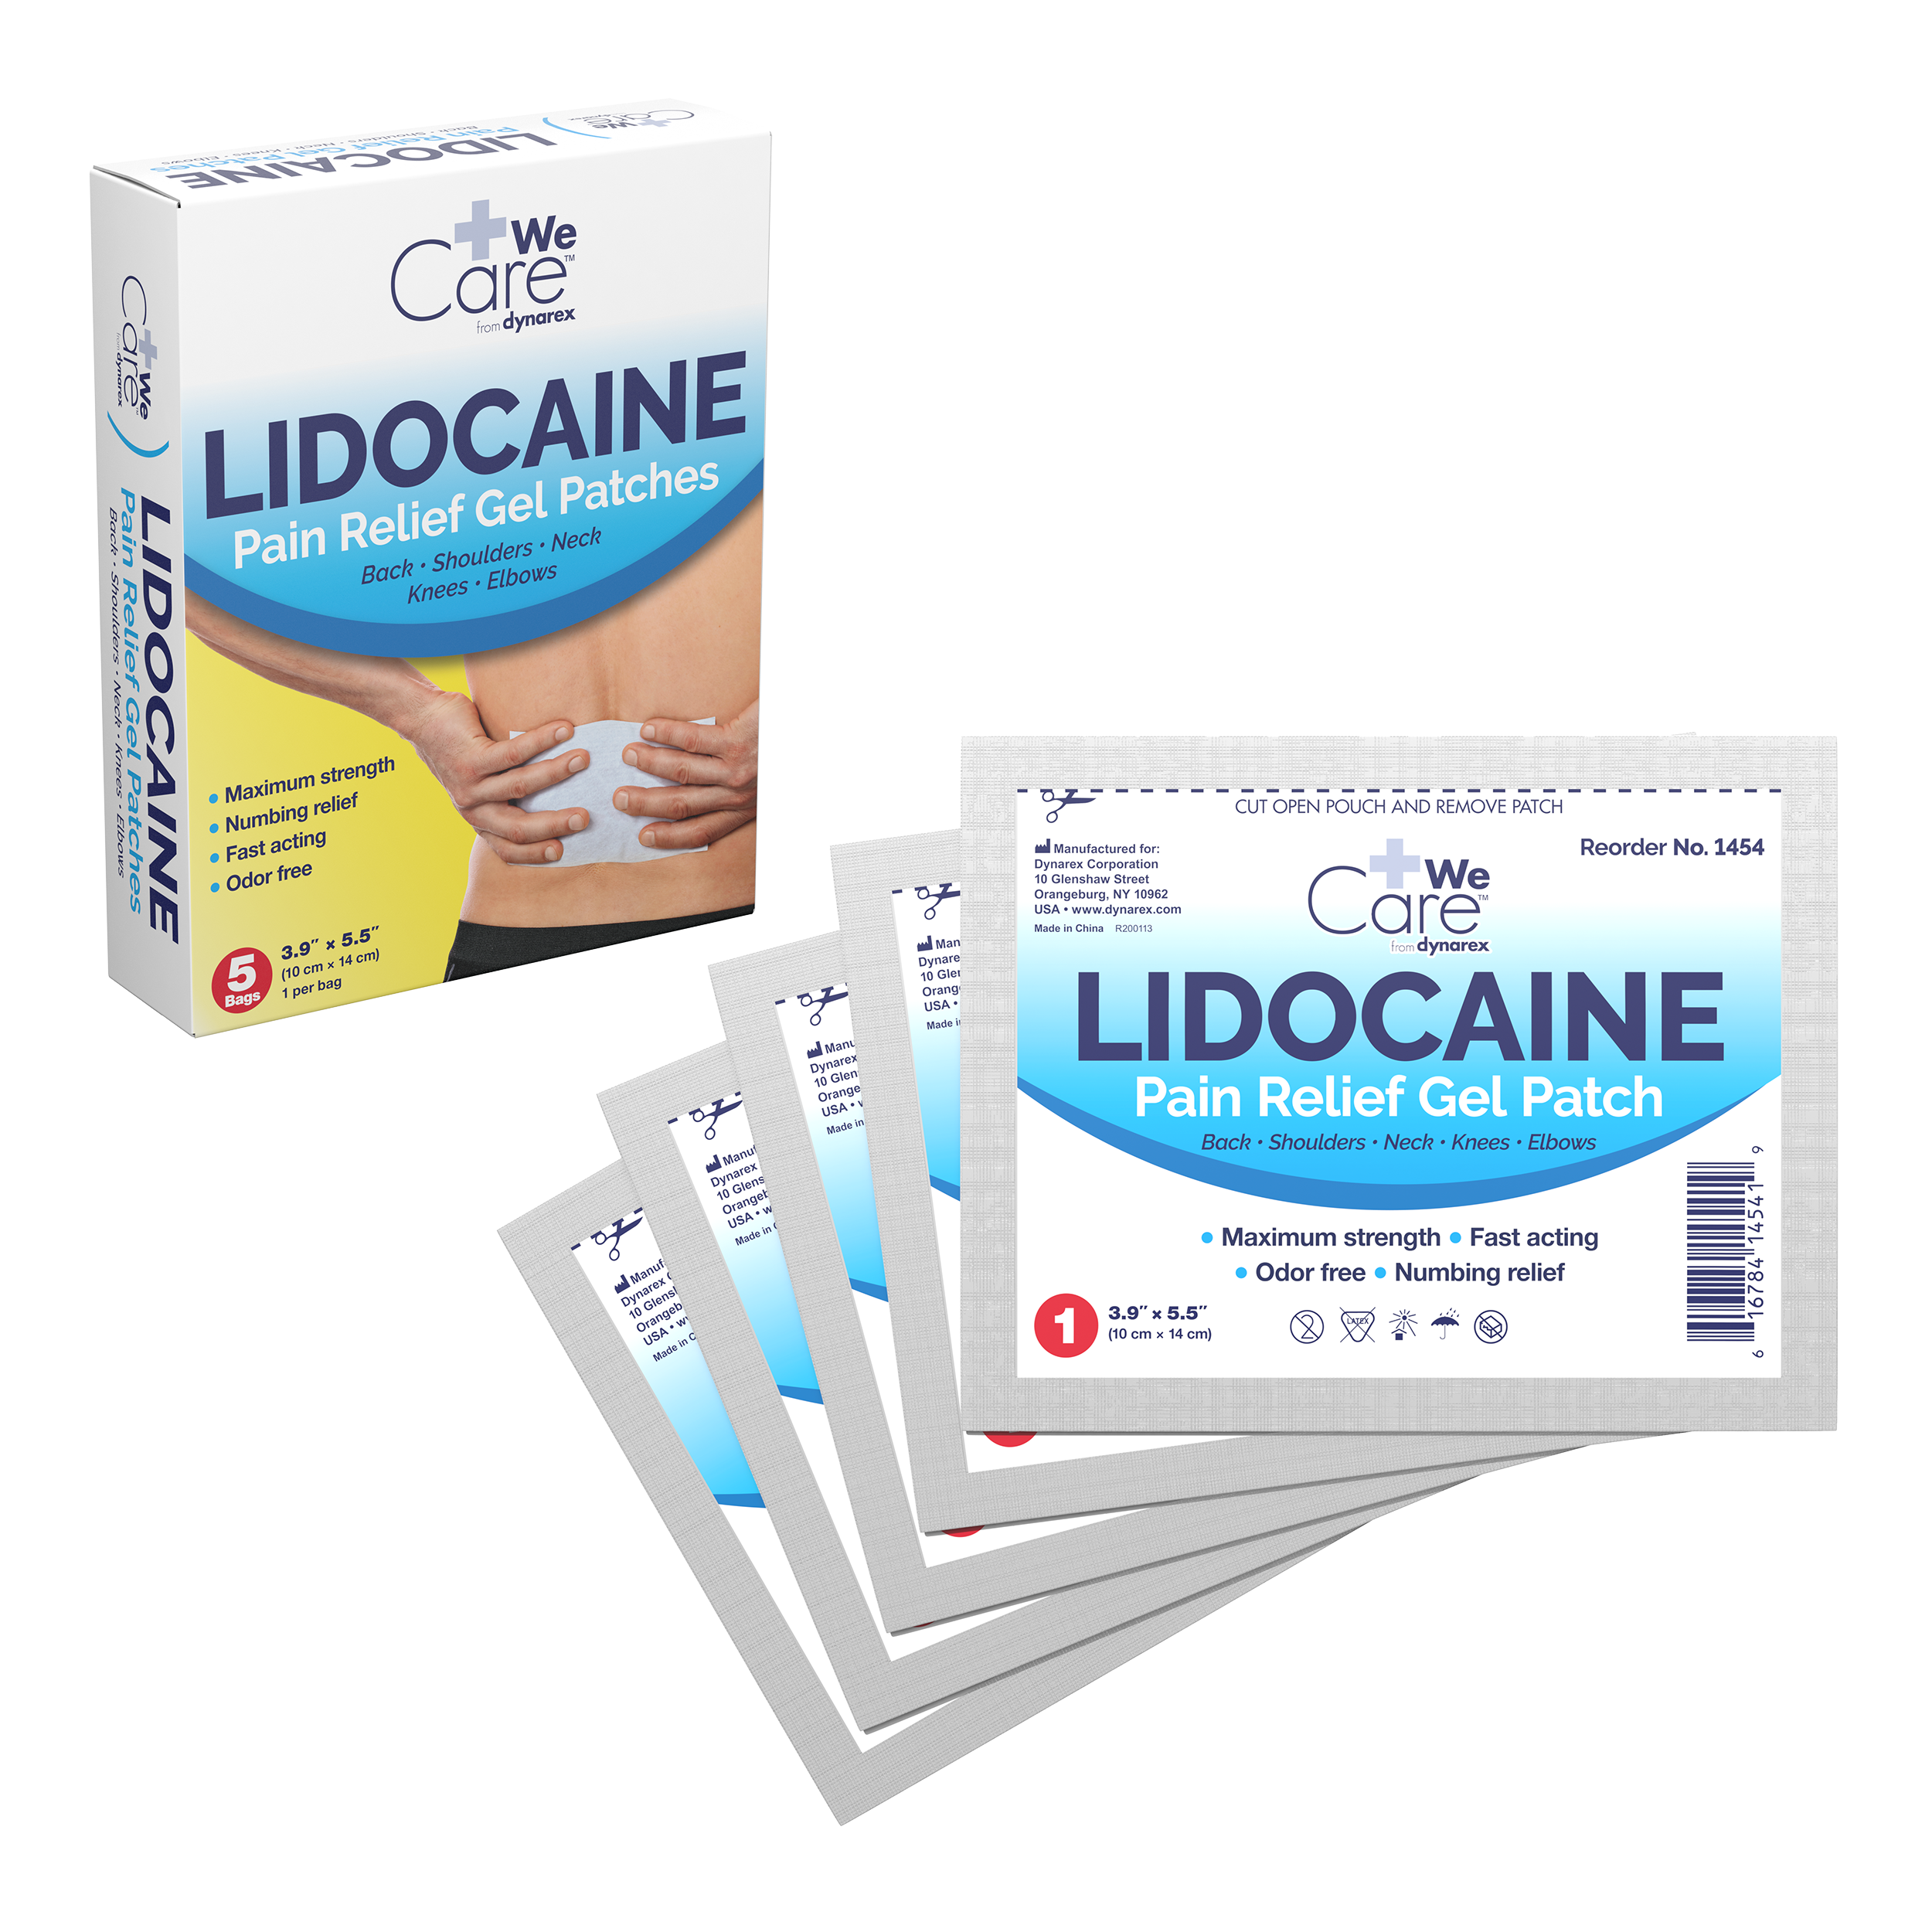 Lidocaine Pain Relief Gel Patches - Back/Shoulders/Neck/Knees/Elbows - 3.9 x 5.5in